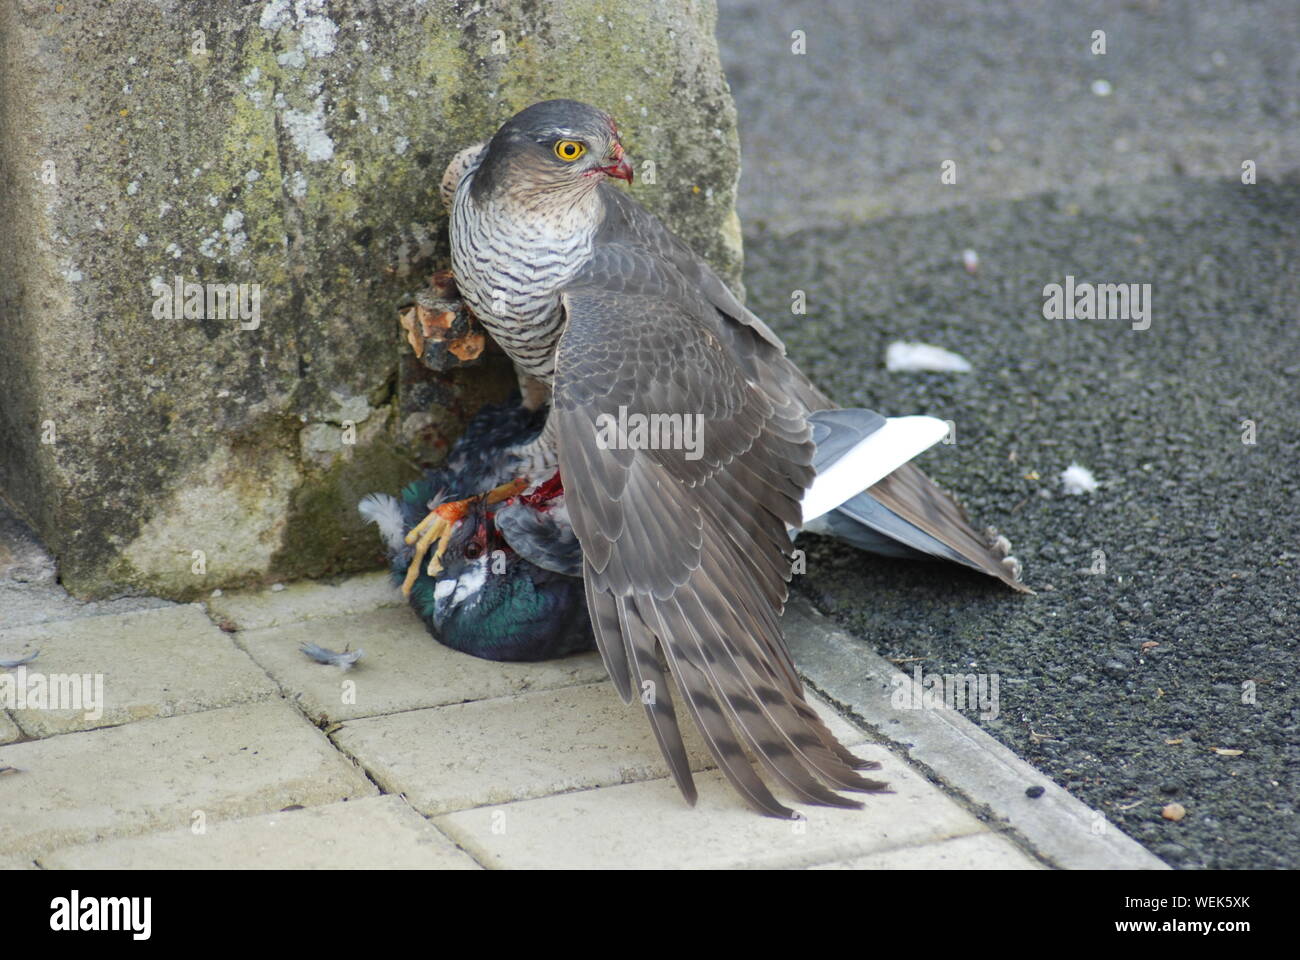 High Angle View Of Sparrow Hawk Hunting Pigeon Stock Photo